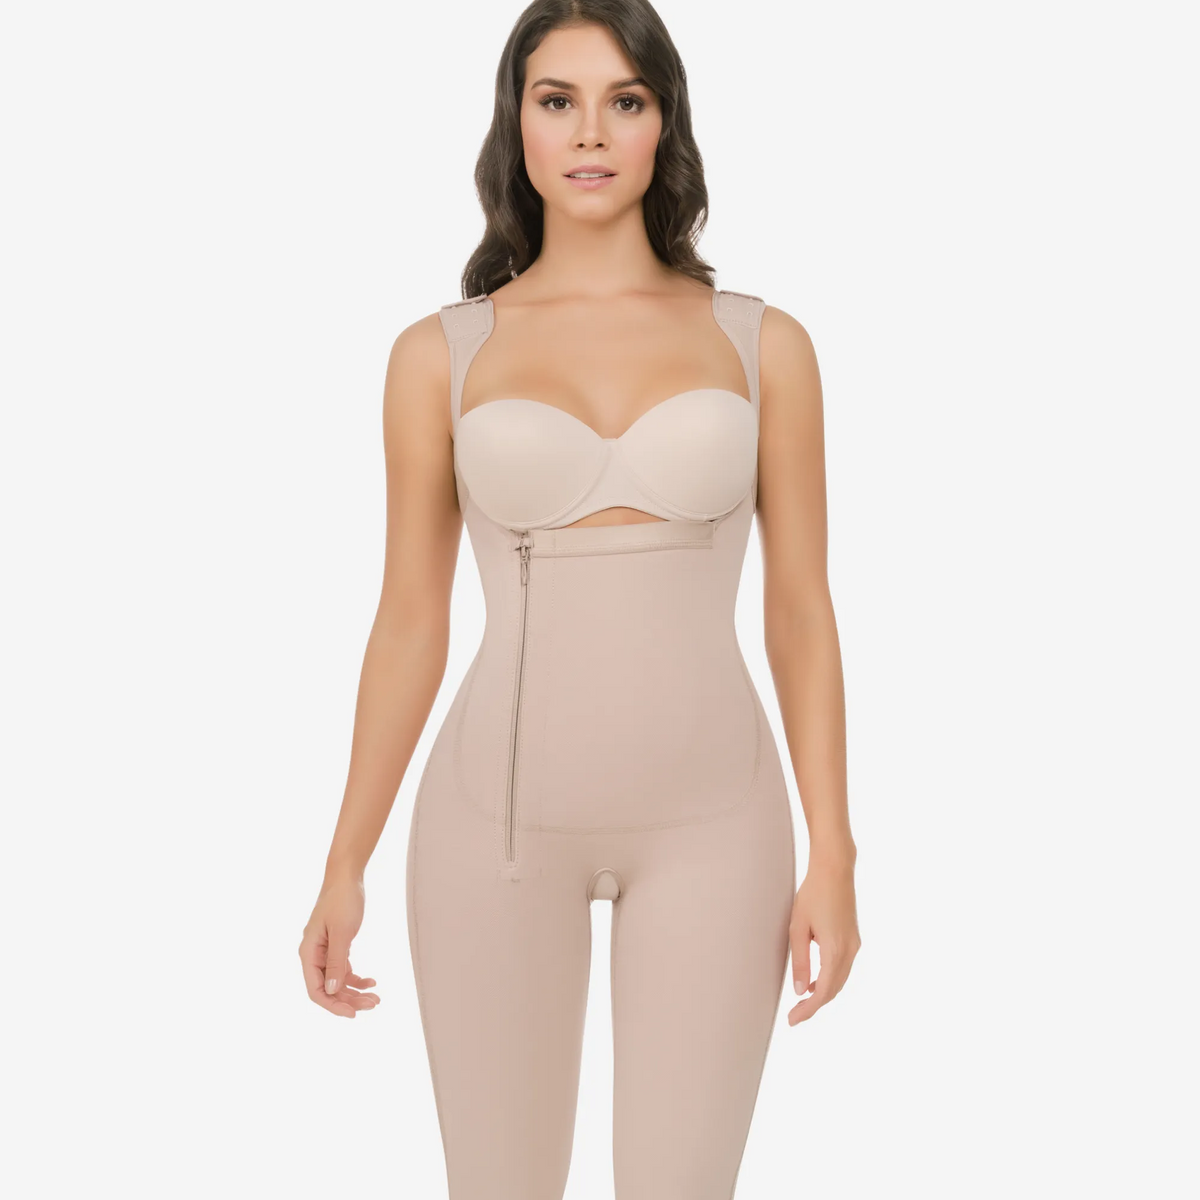 Fajate CYSM Fajas Colombianas Reductoras High Control Mid-Thigh Bodysuit  Ref 455 (Rose, 2XS) at  Women's Clothing store